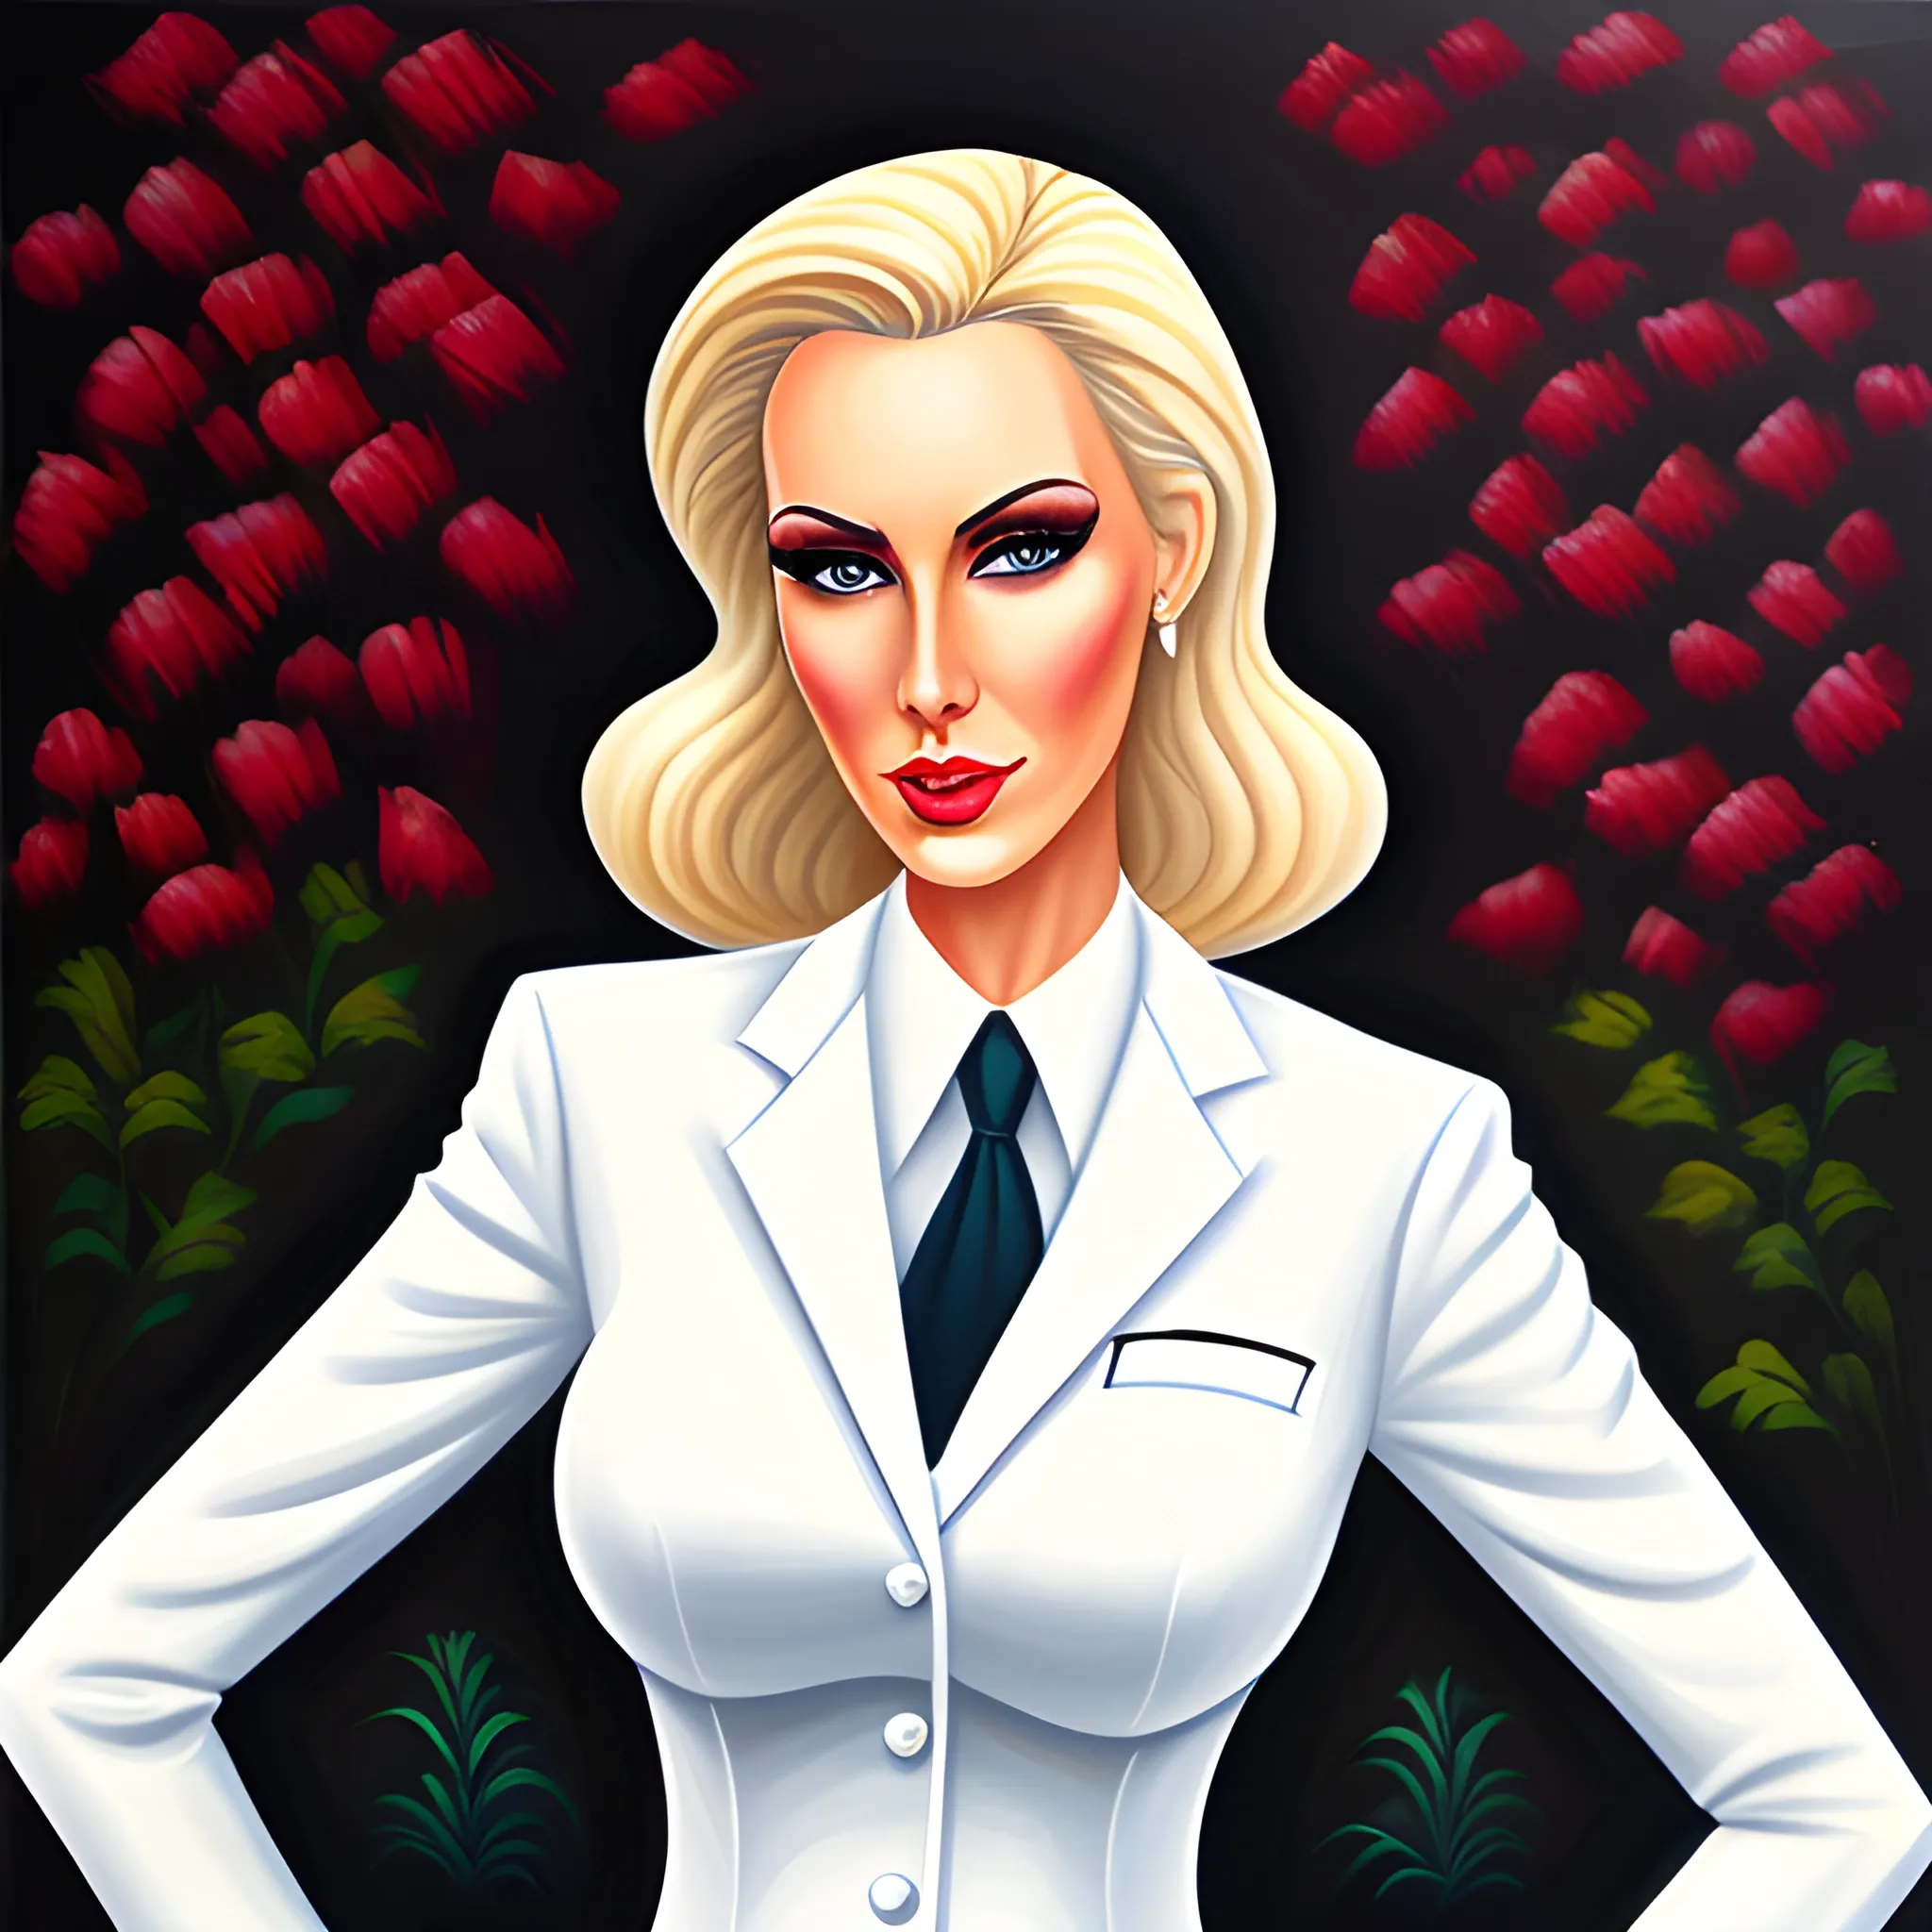 girl blonde 35 years old in a white suit, Cartoon, Oil Painting